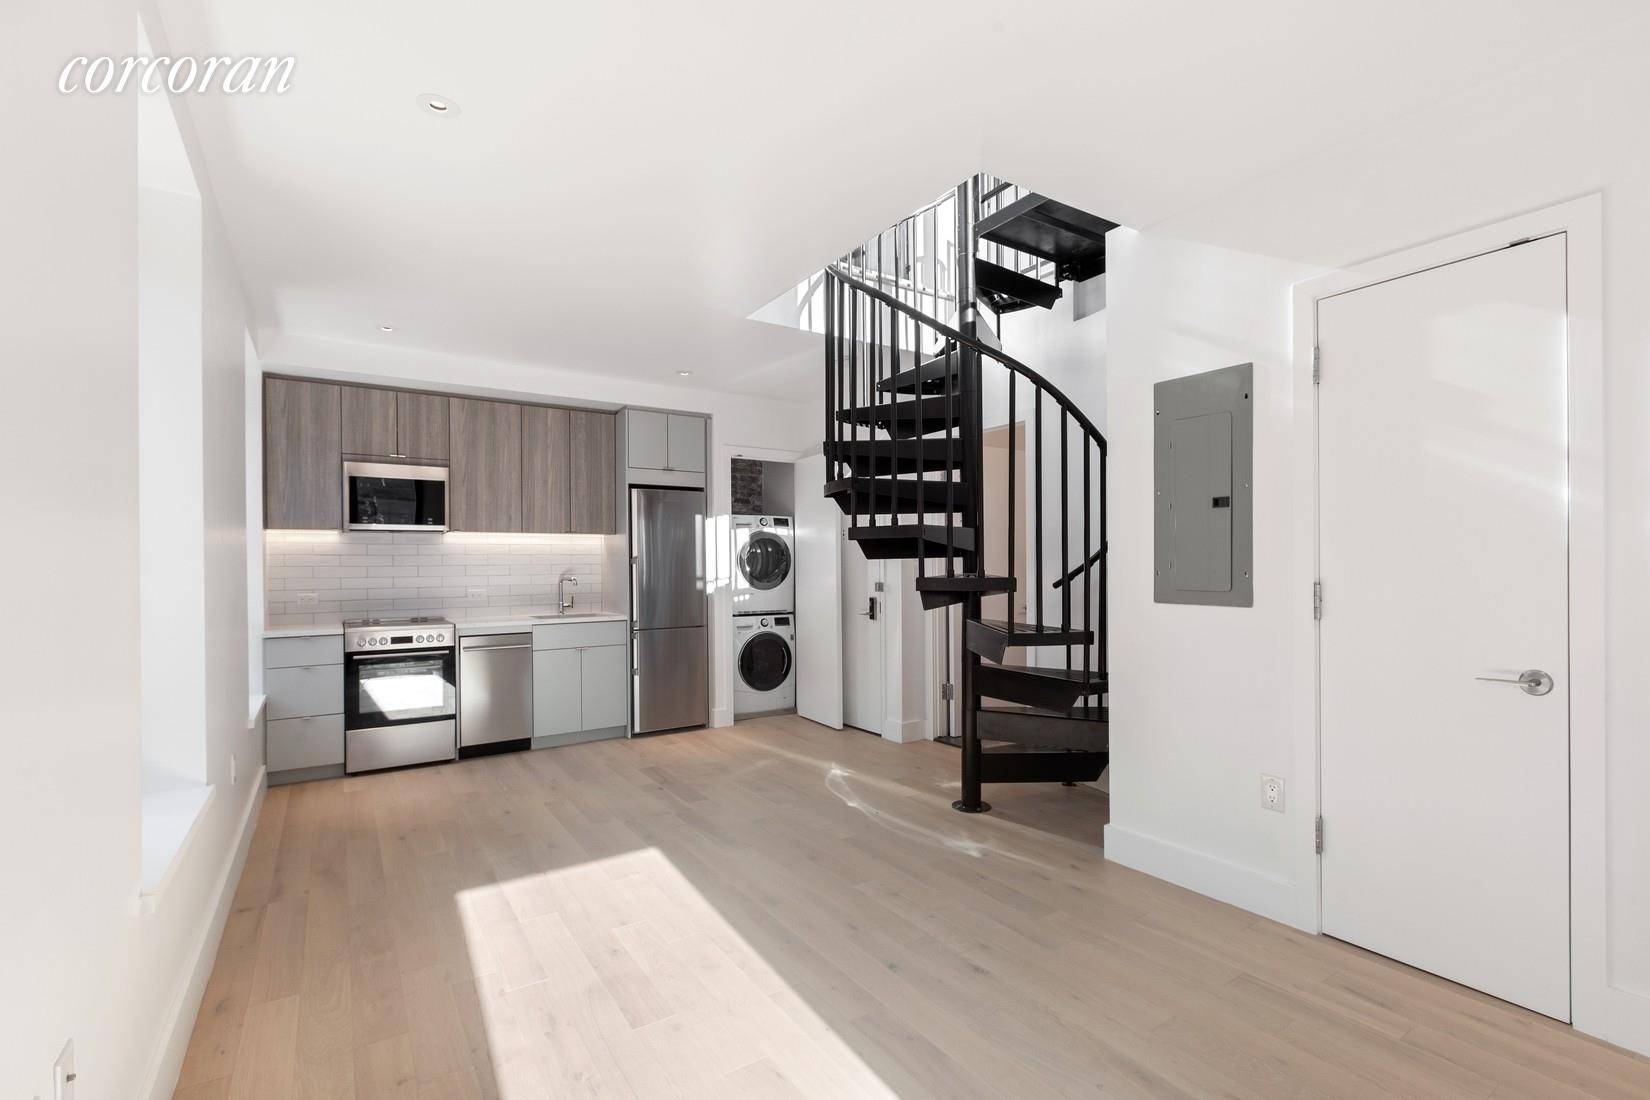 Stunning, brand new duplex apartment in a brand new modern, boutique building.